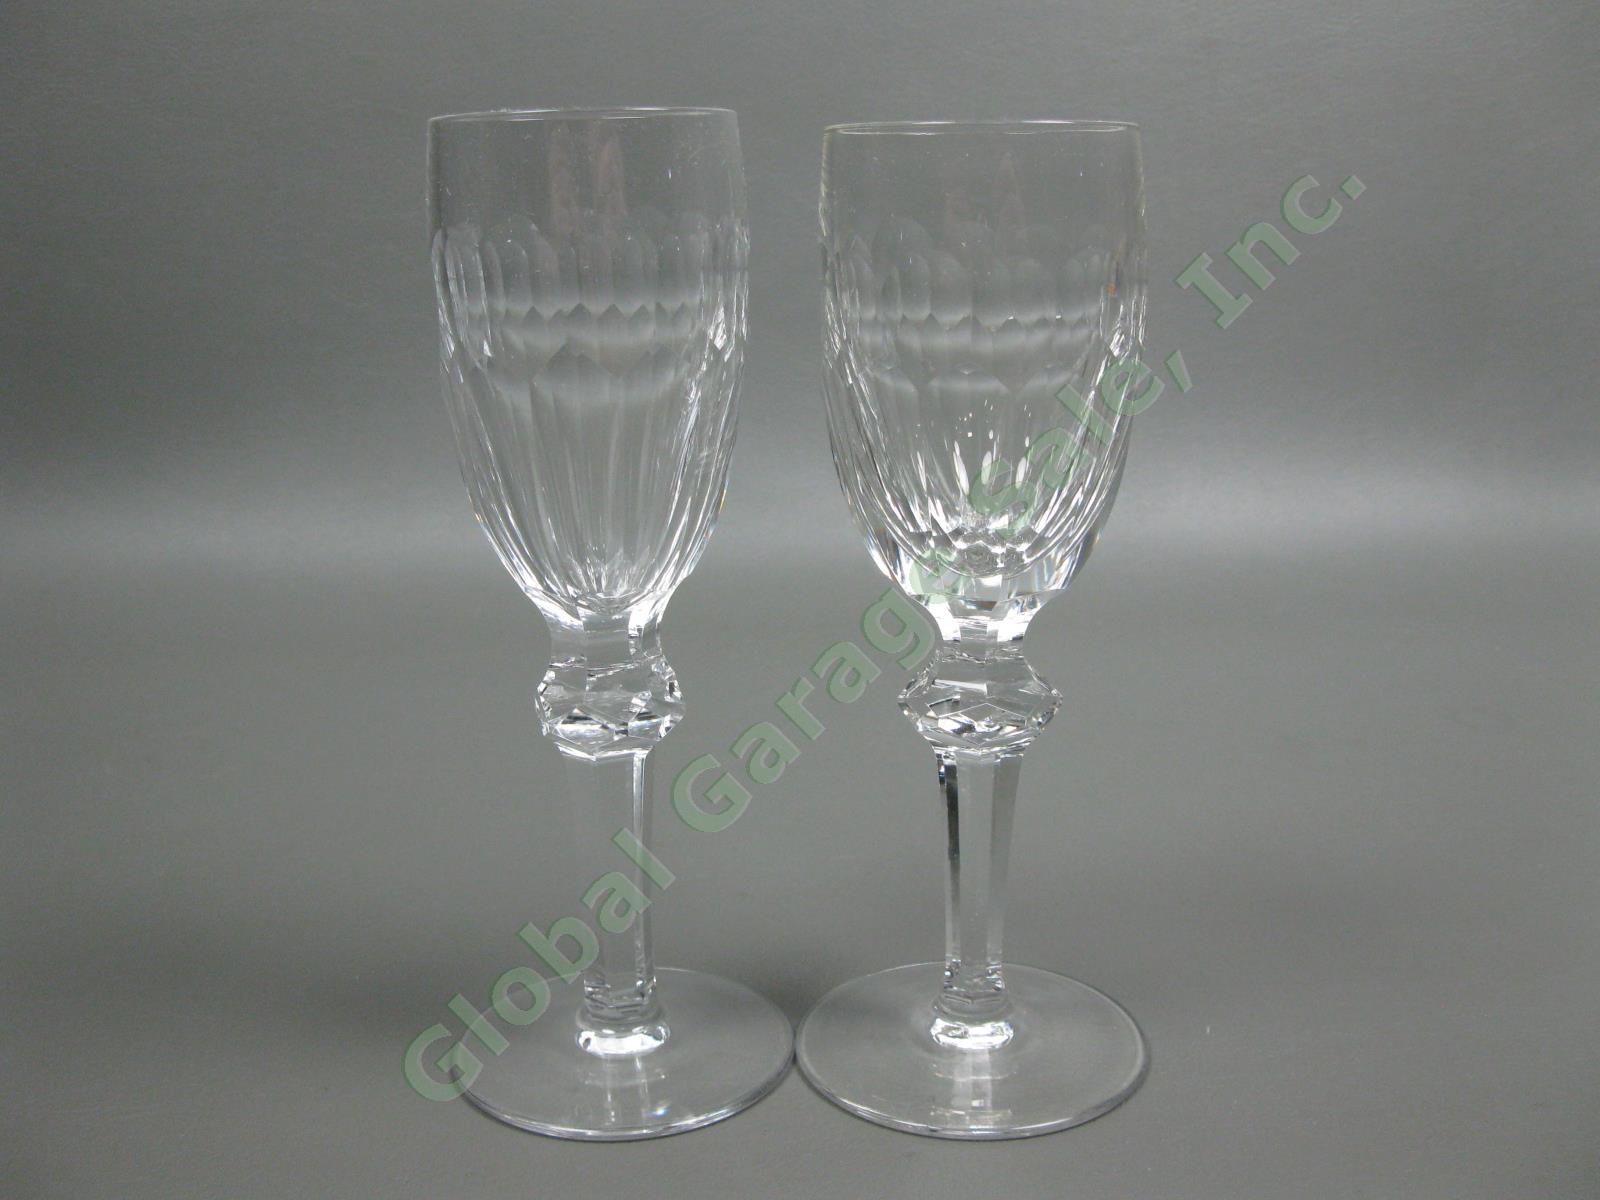 6 Waterford Crystal Curraghmore Sherry Wine Glasses Ireland Blown Cut Glass Set 6